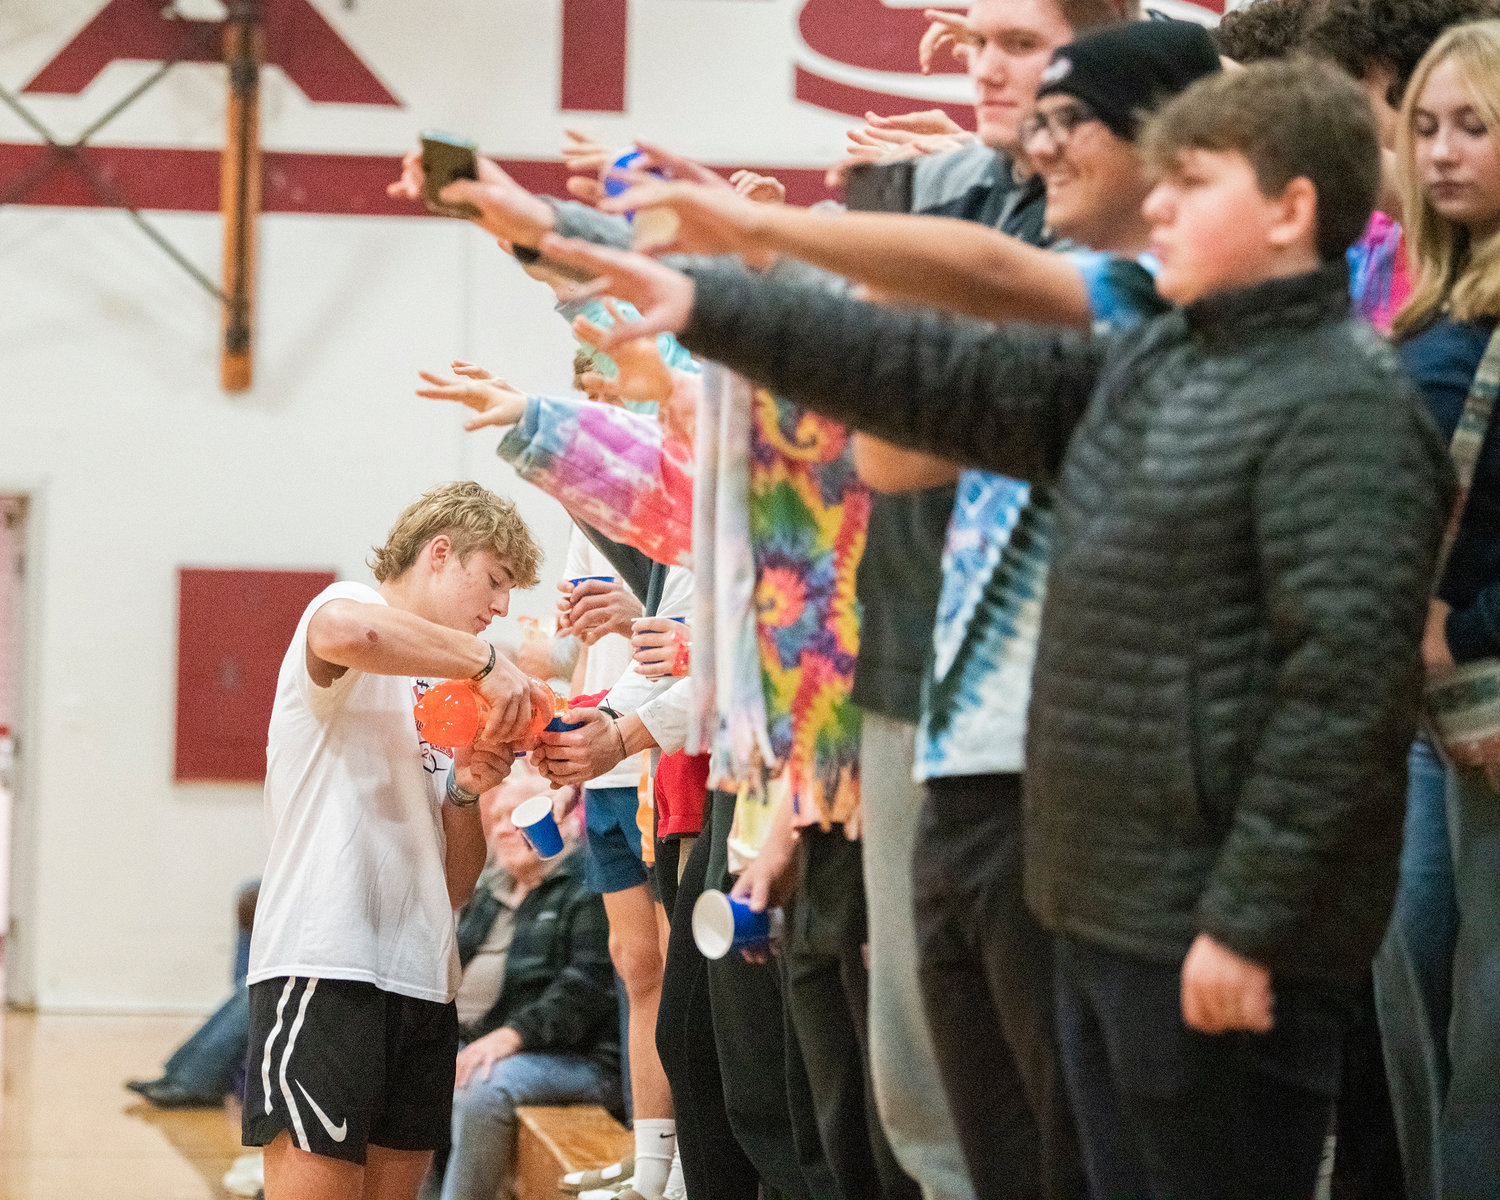 Cups are poured after hoops are made at halftime during a basketball game in Chehalis Tuesday night.